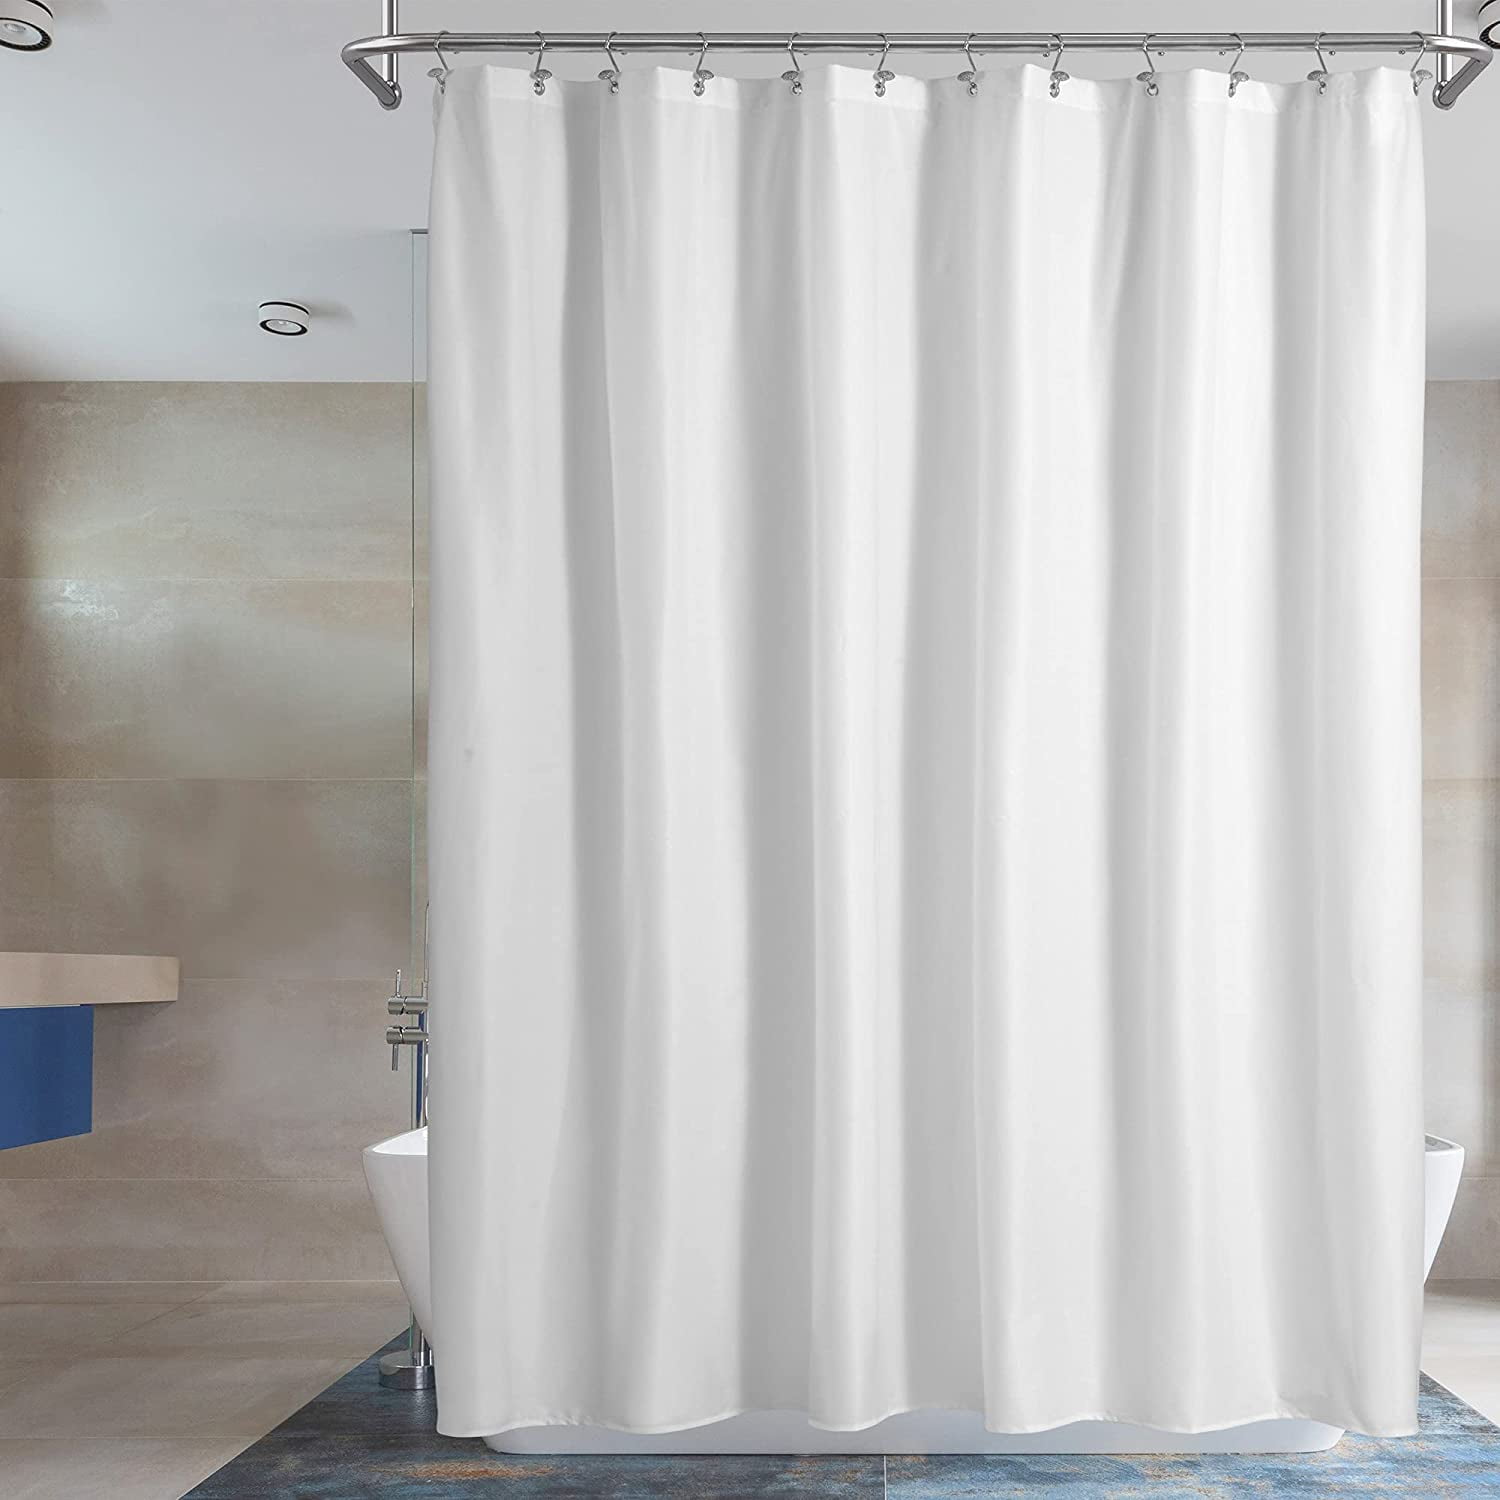 PEVA, Barossa Design Small Shower Curtain for Shower Stall Size 36 x 72 inches 